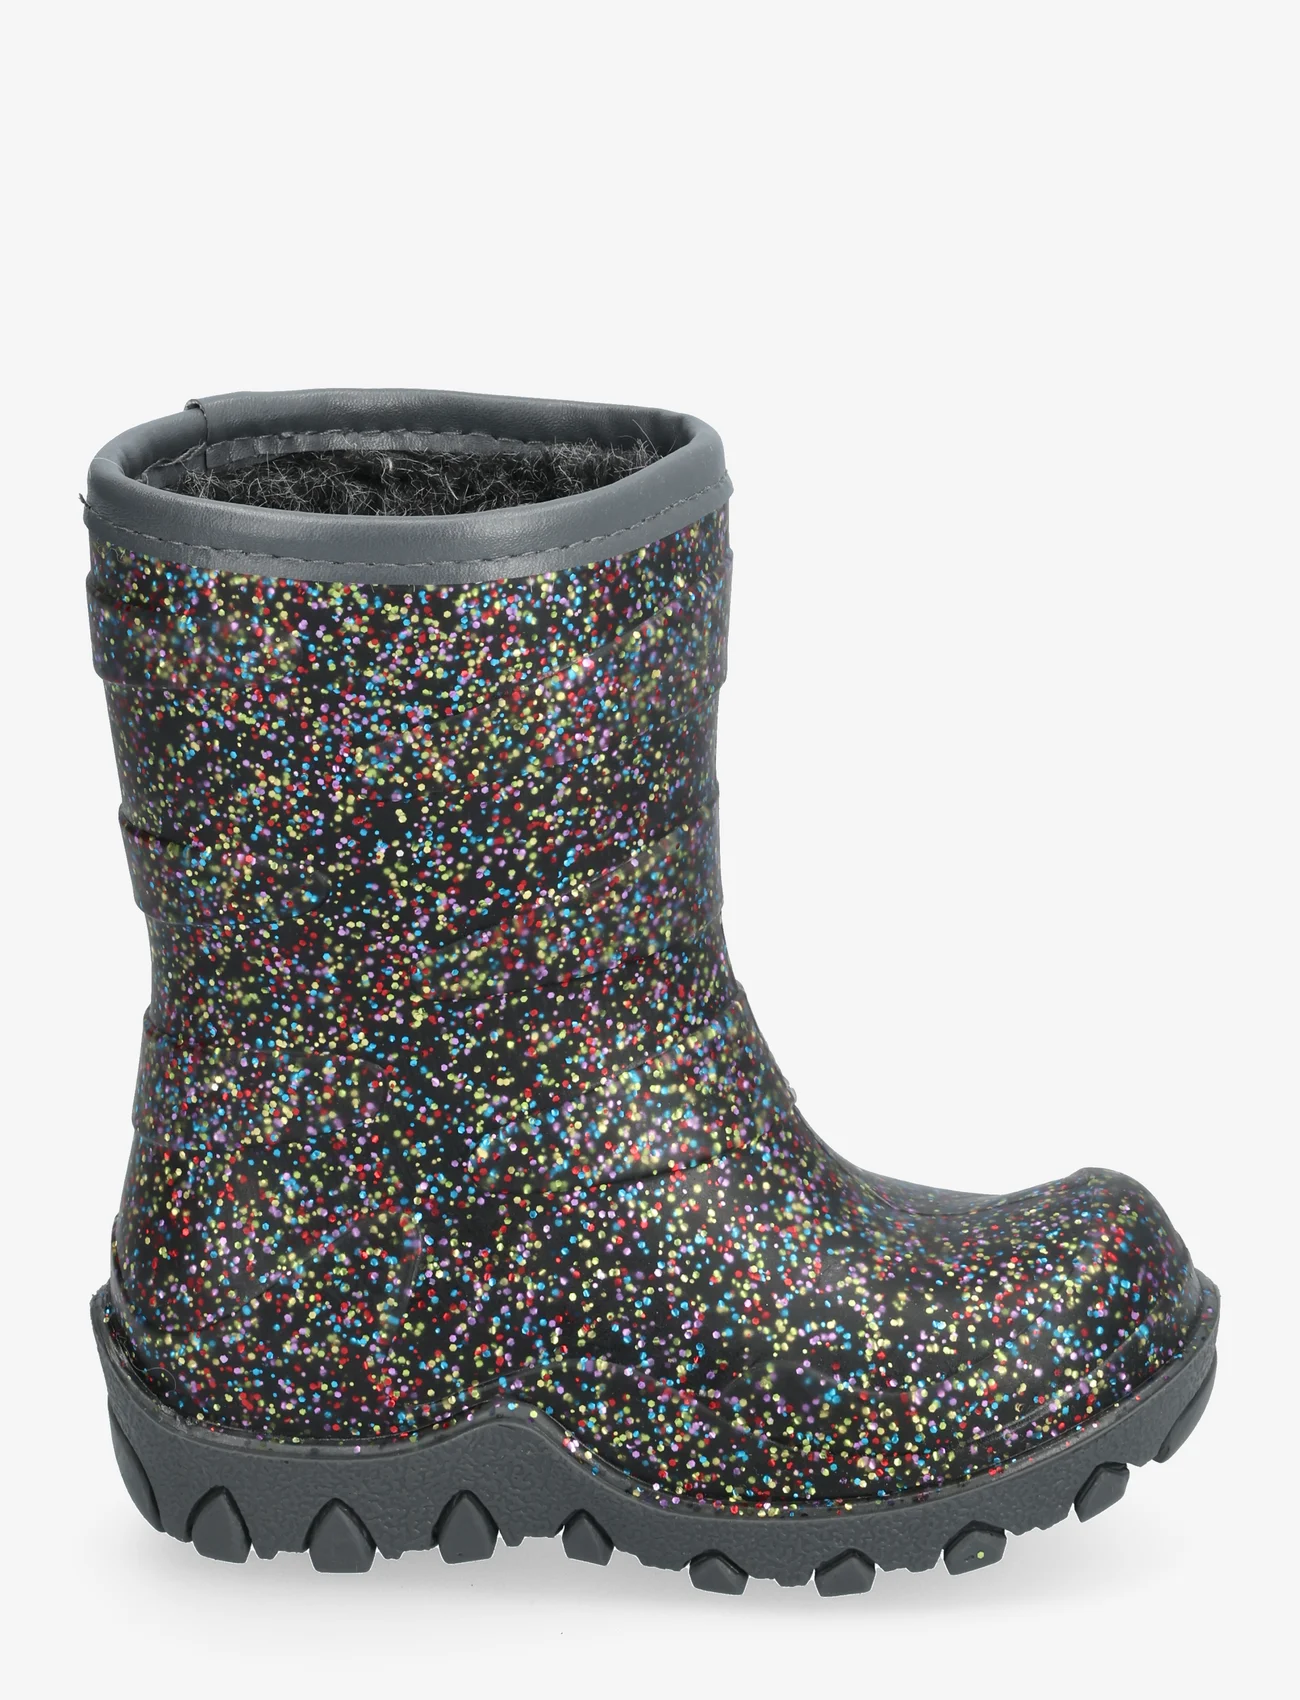 mikk-line - Thermal Boot - Glitter - lined rubberboots - multi - 1